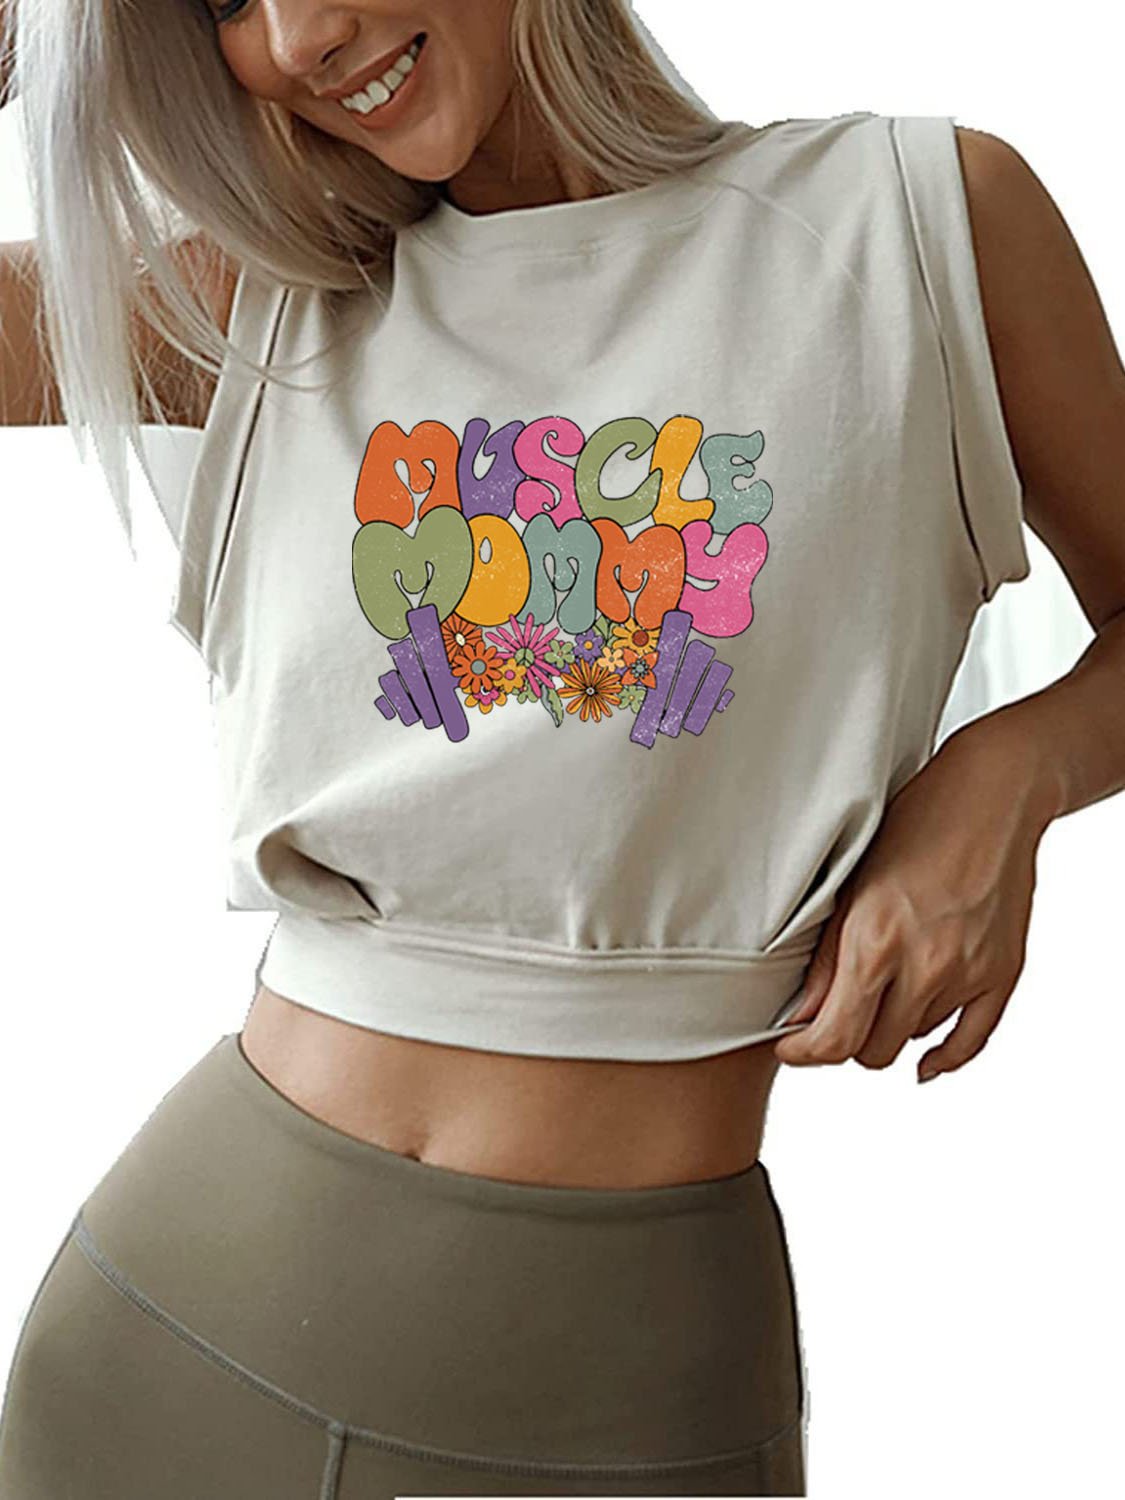 MUSCLE MOMMY SLEEVELESS CROP TOPS